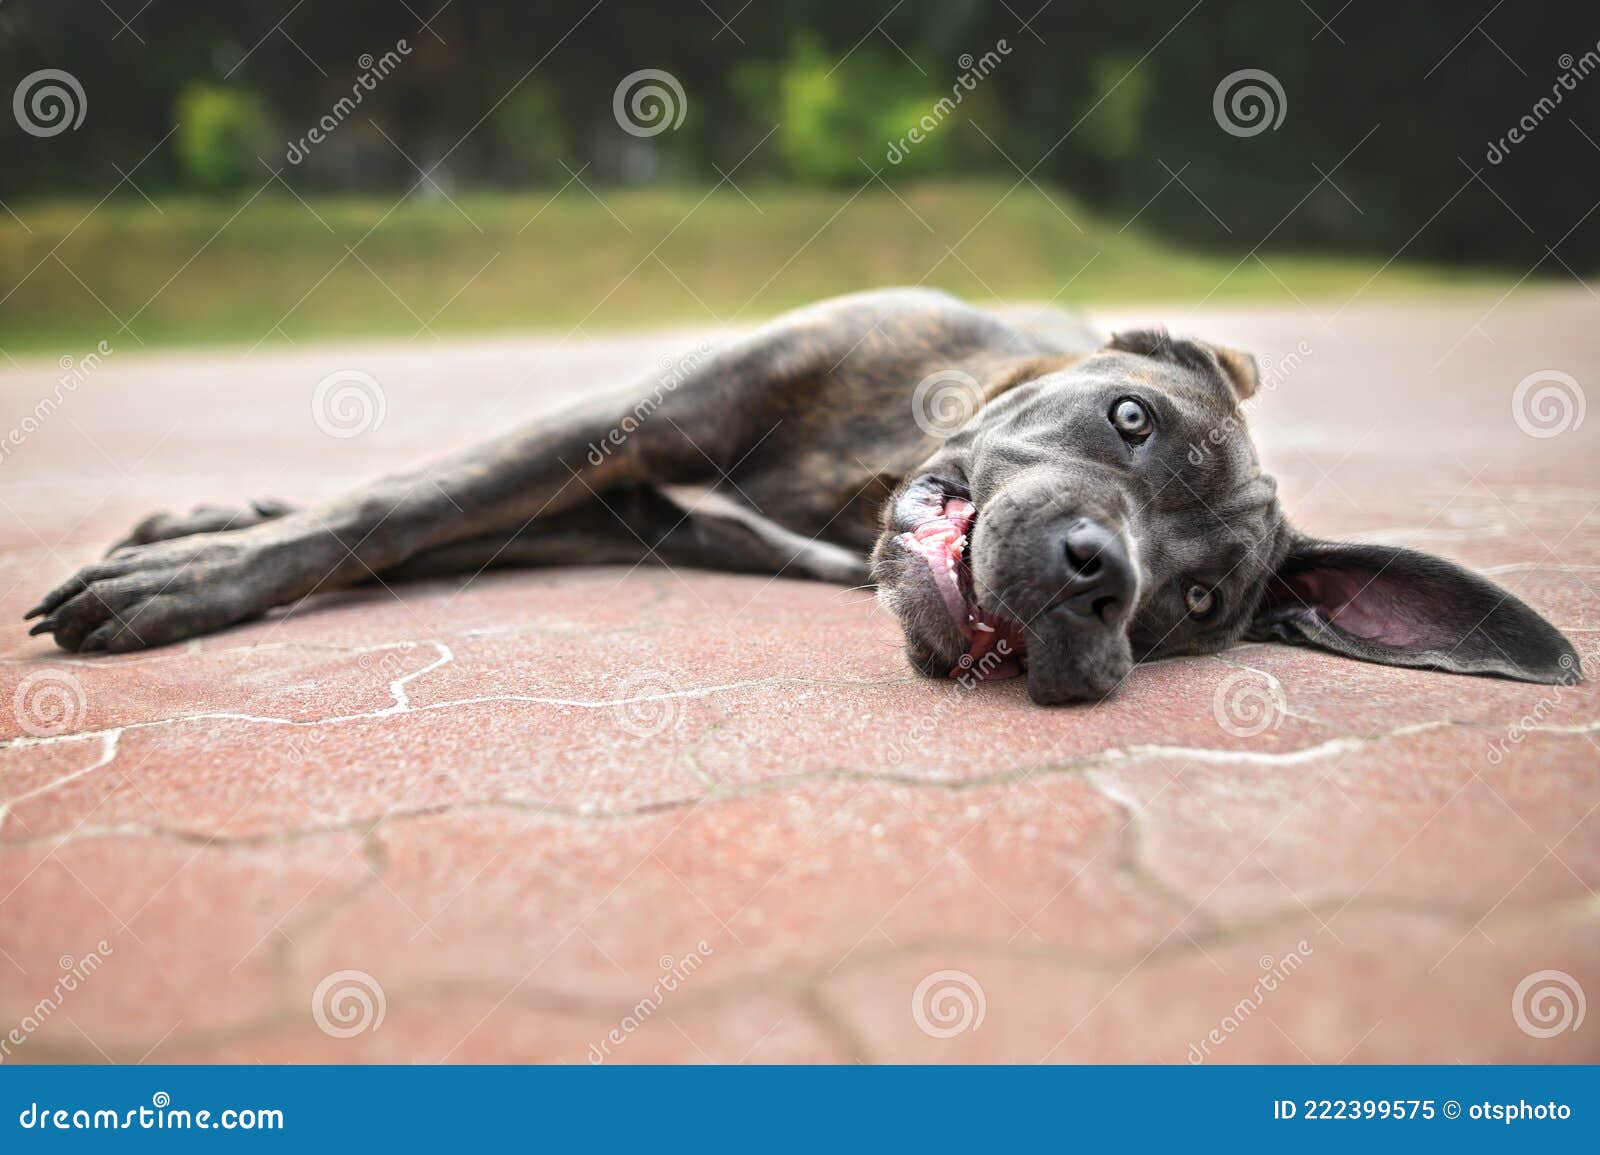 why do dogs lay on hot concrete